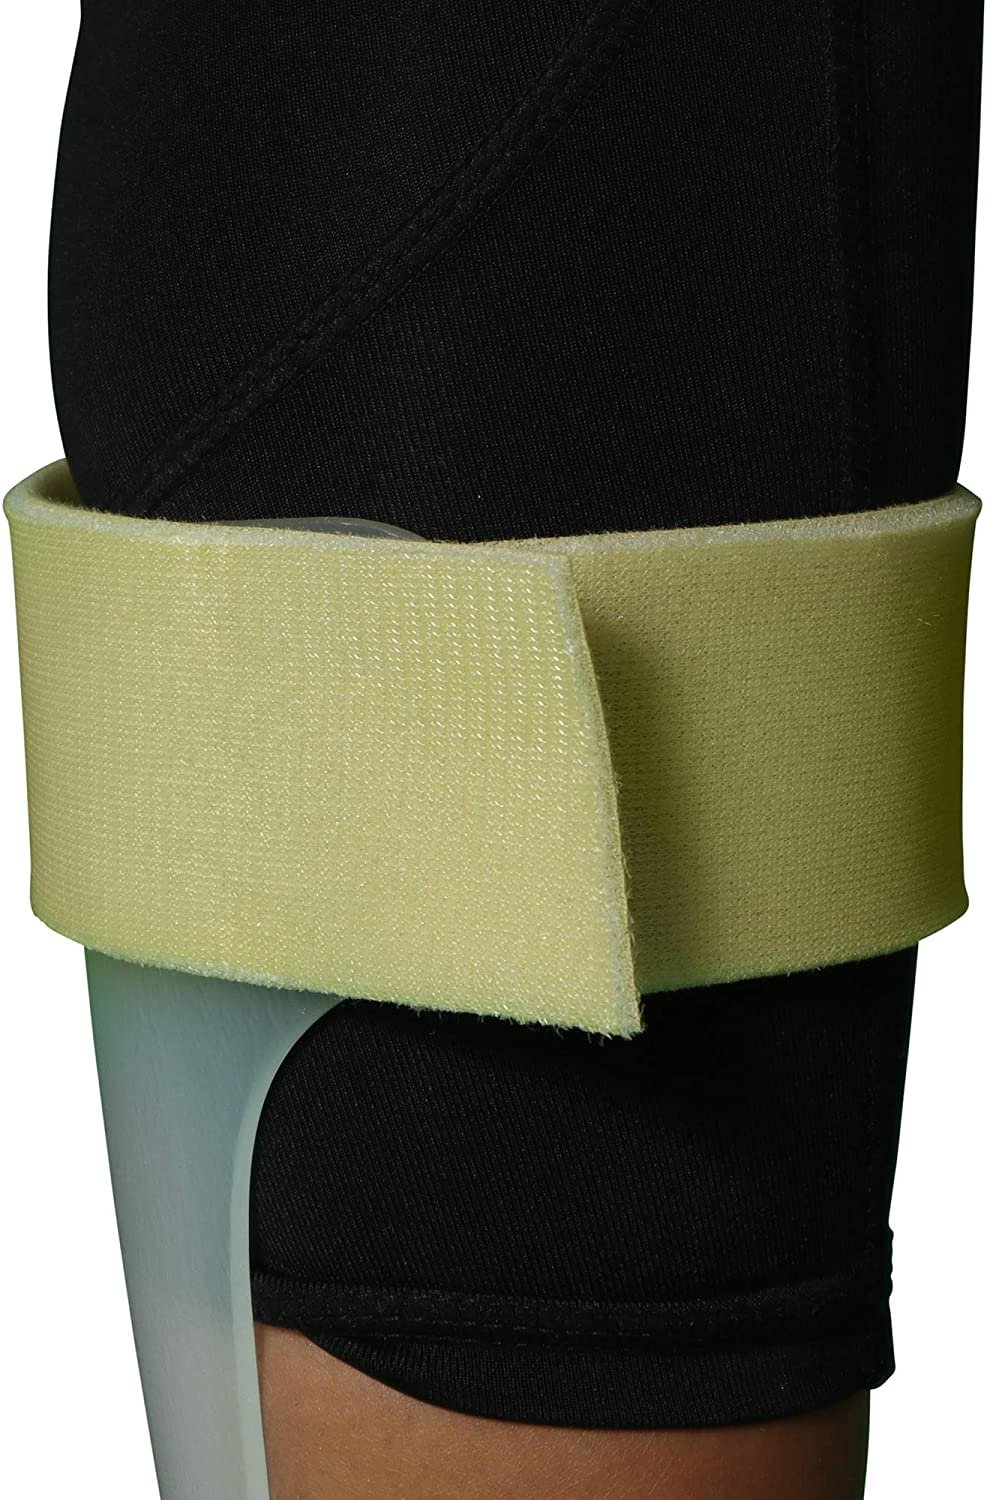 Ankle Foot Orthosis Support - AFO - Drop Foot Support Splint